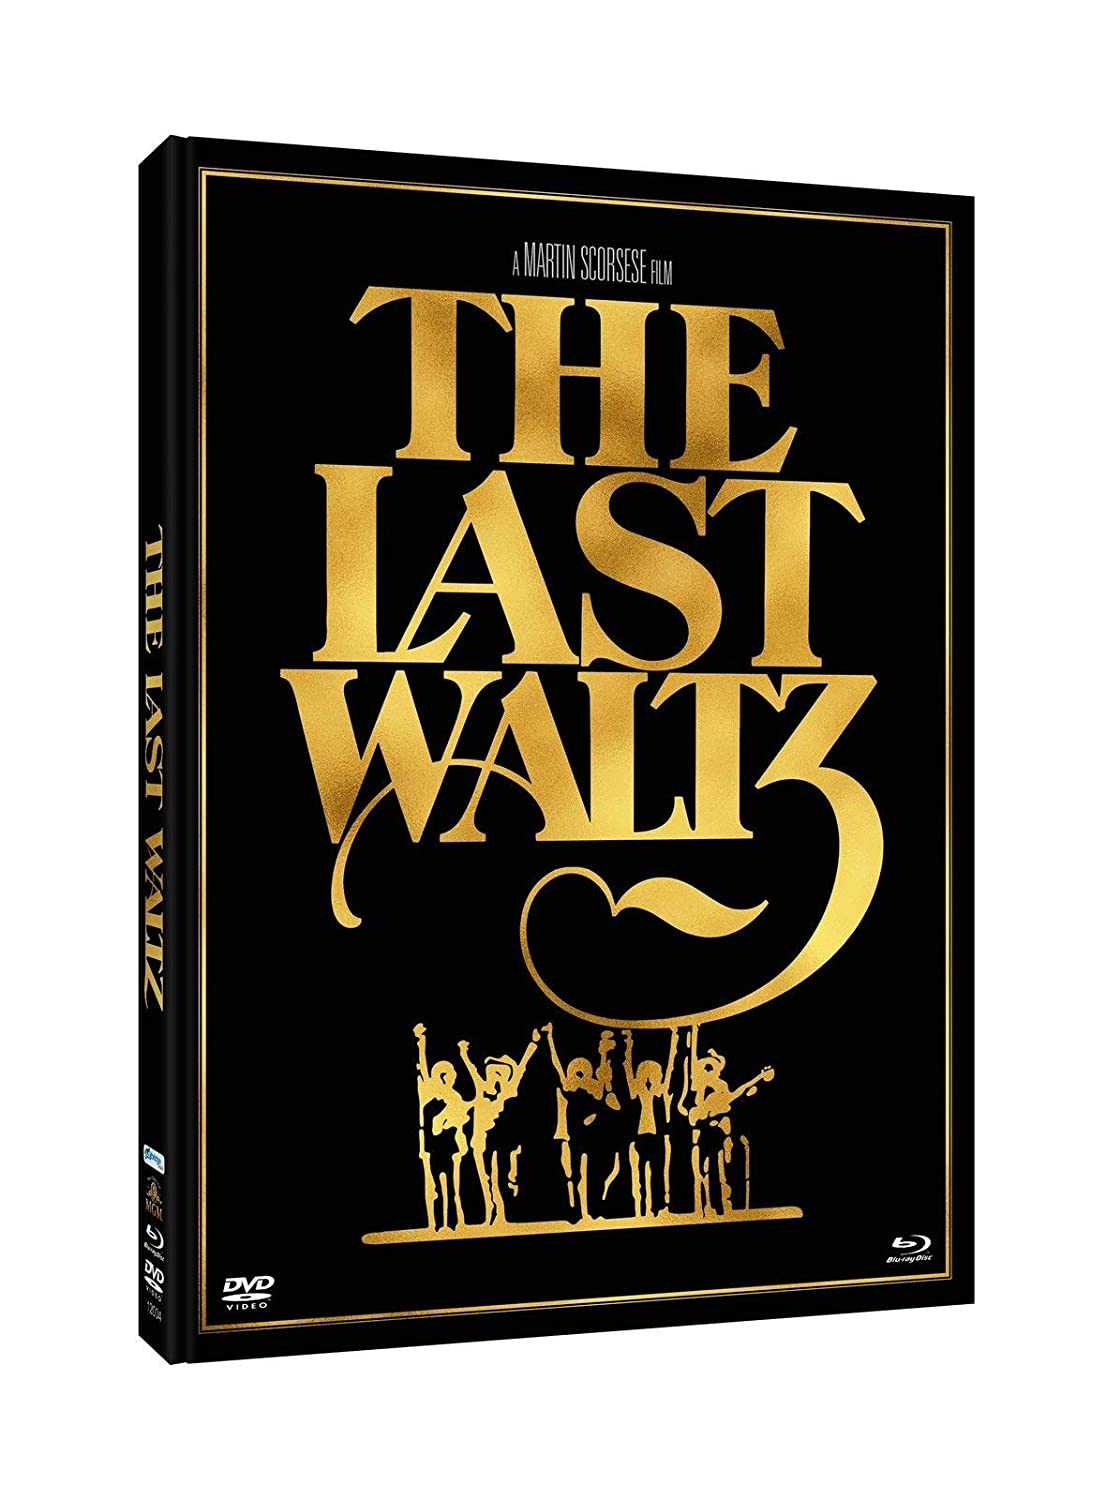 THE BAND SPECIAL - The Last Waltz - Robbie Robertson, The Band 50th & The Irishman OST